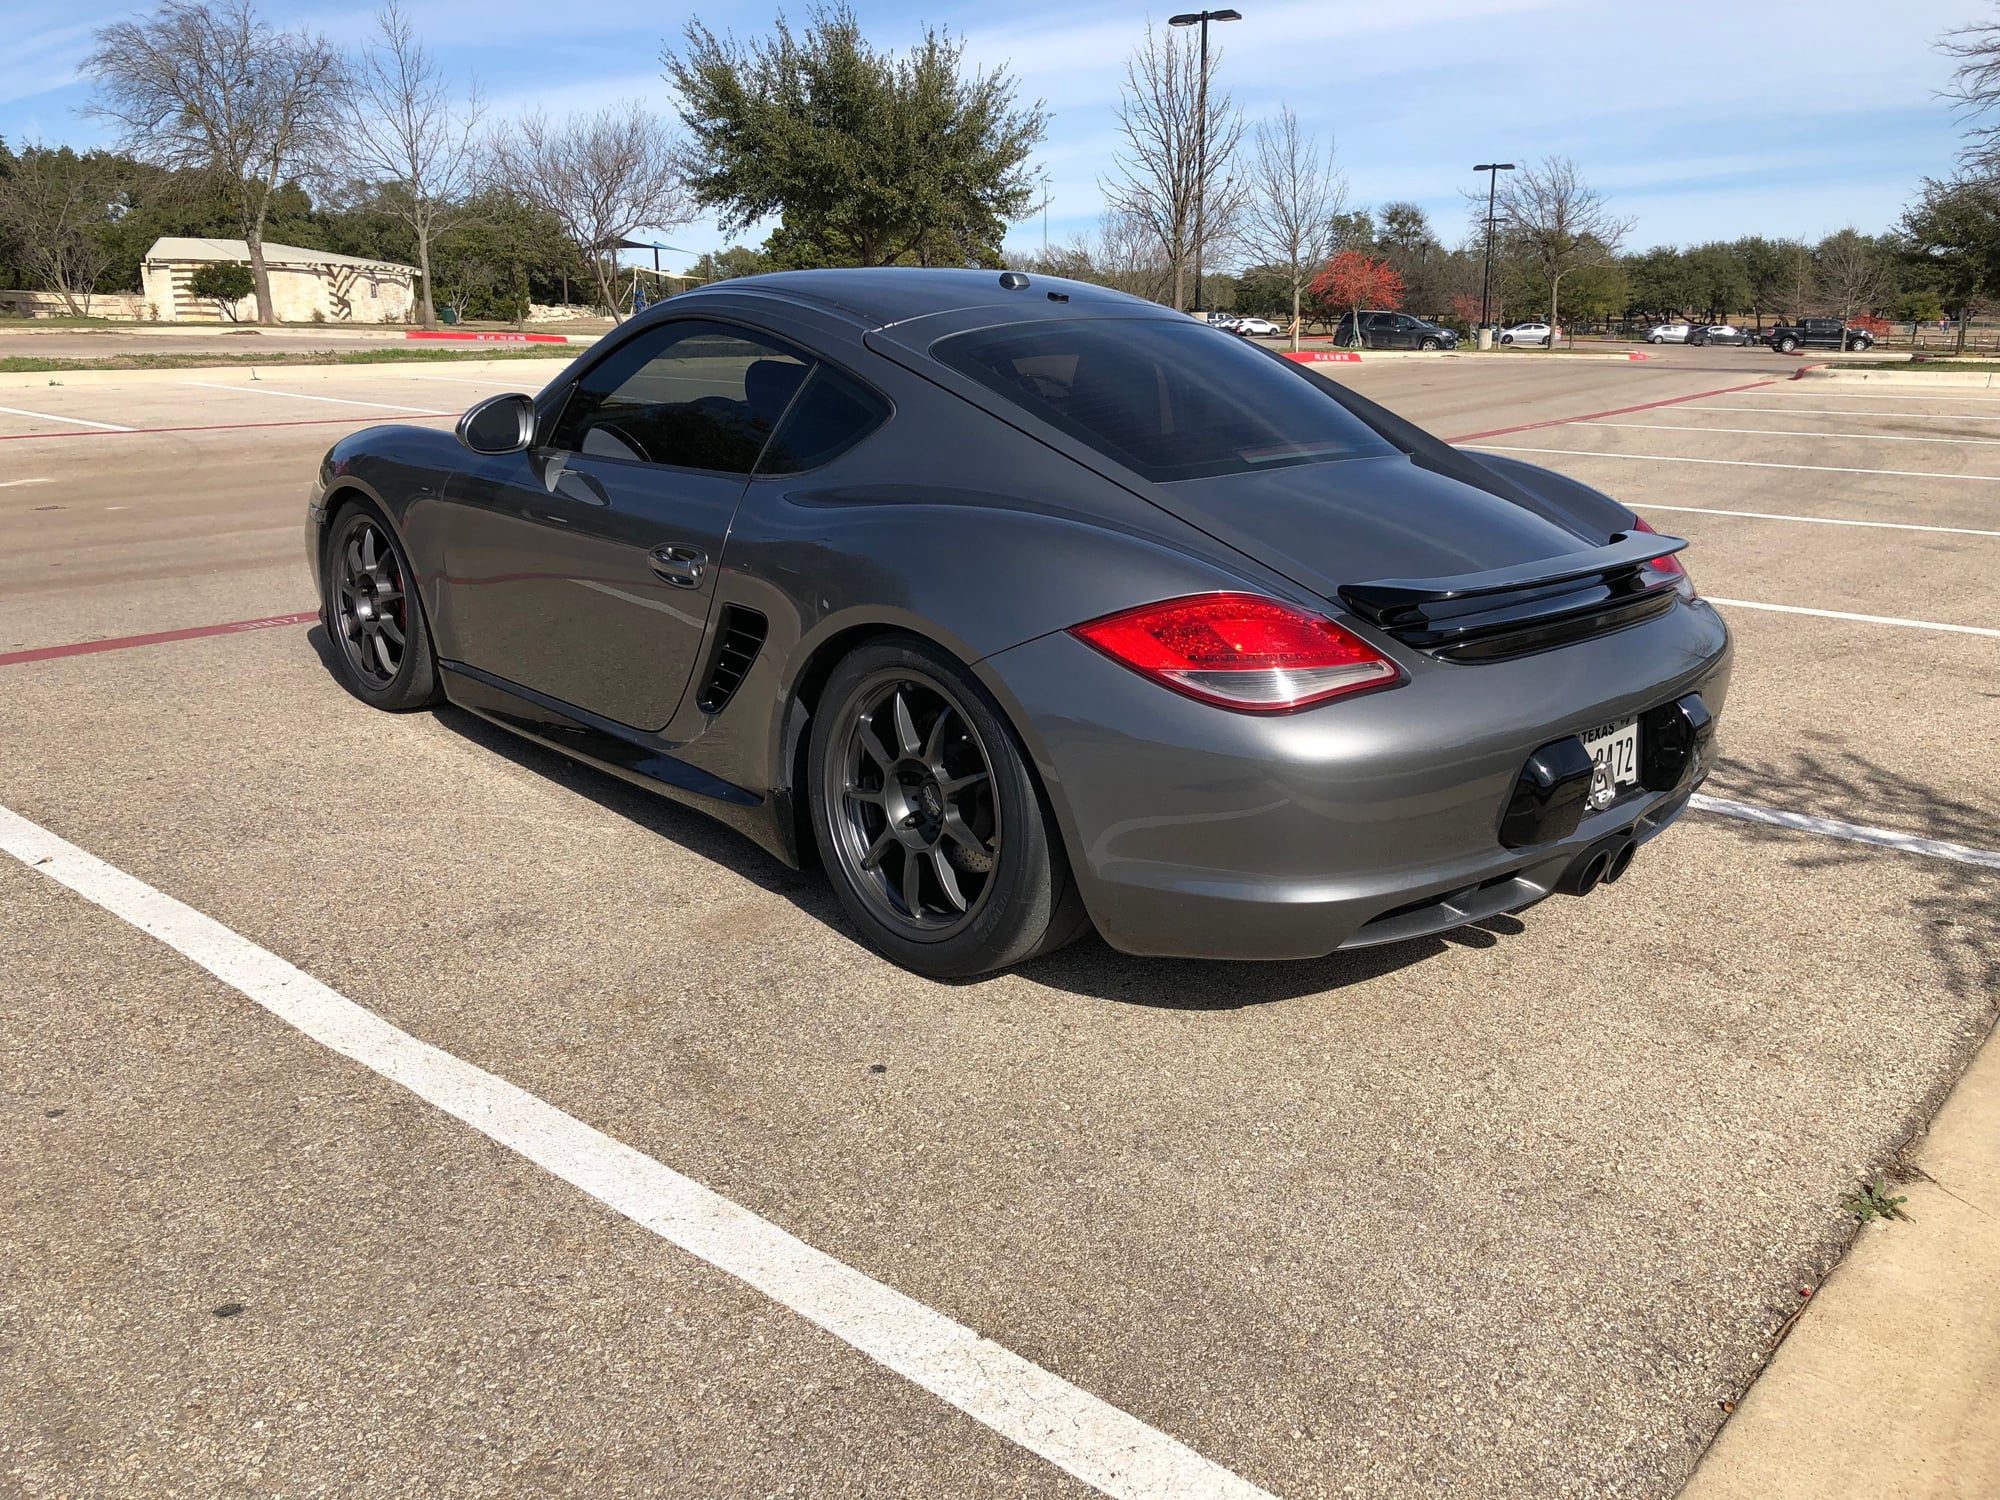 2009 Porsche Cayman - 2009 987.2 Cayman S PDK - HPDE Prepped - Used - VIN WP0AB29849U780187 - 49,400 Miles - 6 cyl - 2WD - Automatic - Hatchback - Gray - Austin, TX 78758, United States